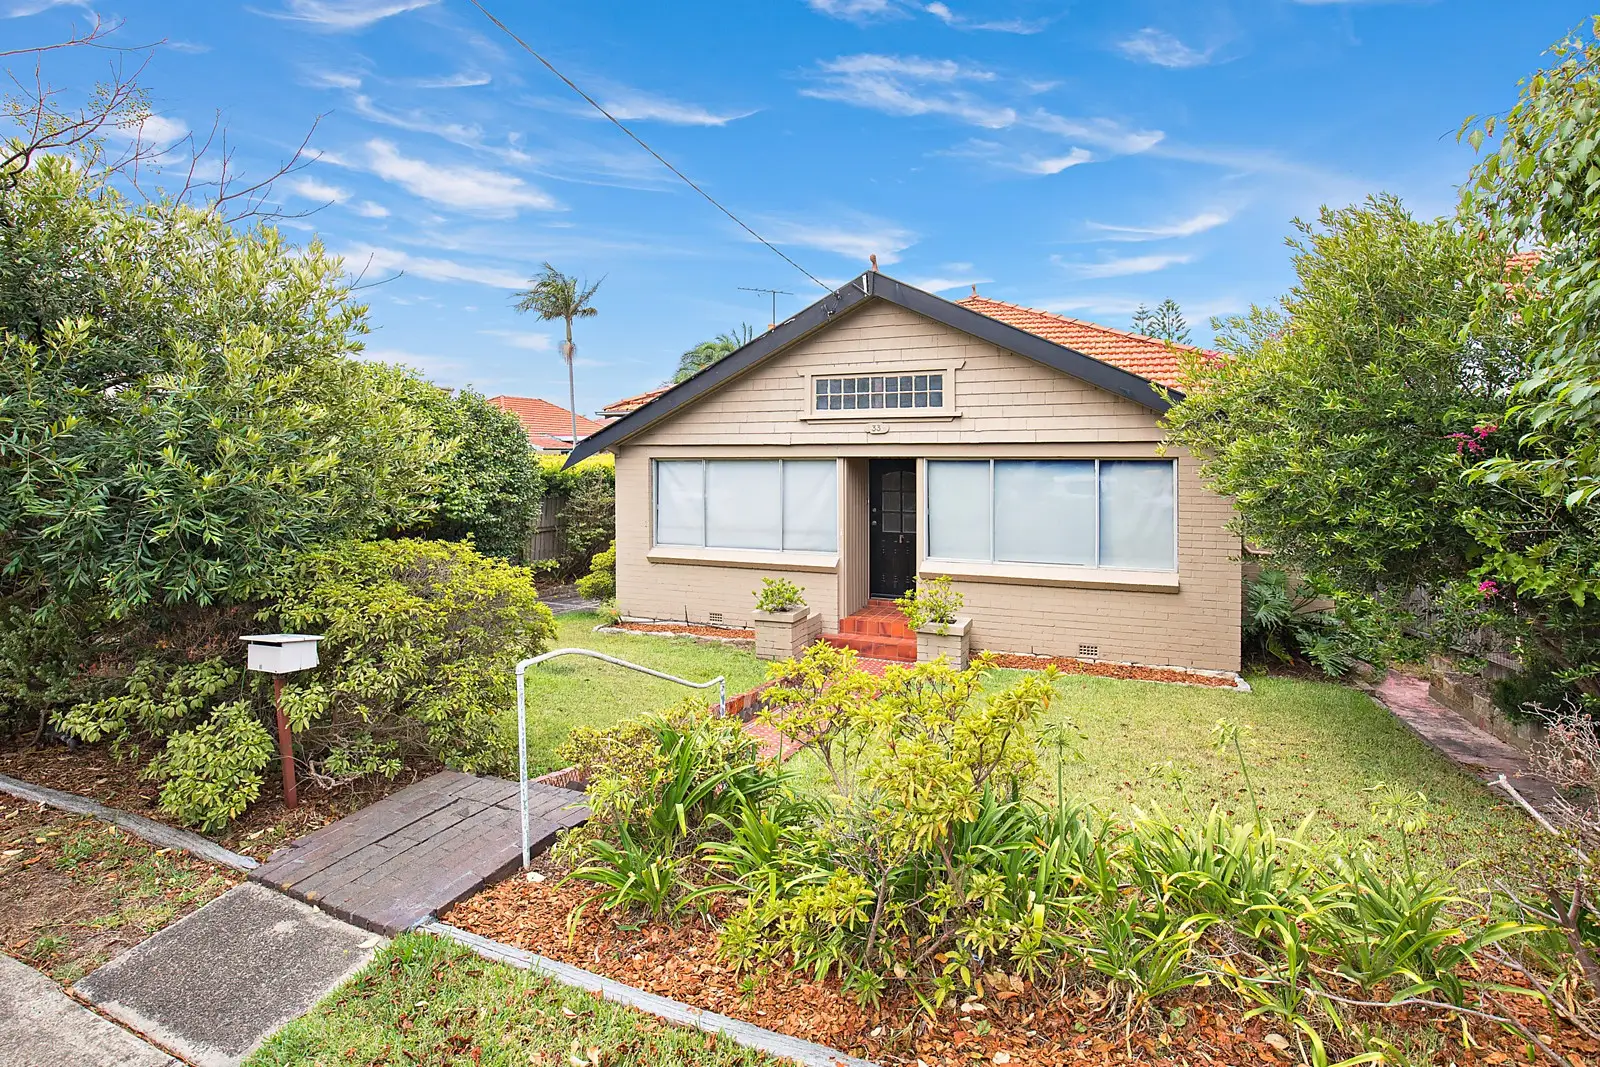 Photo #1: 33 Girilang Avenue, Vaucluse - Sold by Sydney Sotheby's International Realty